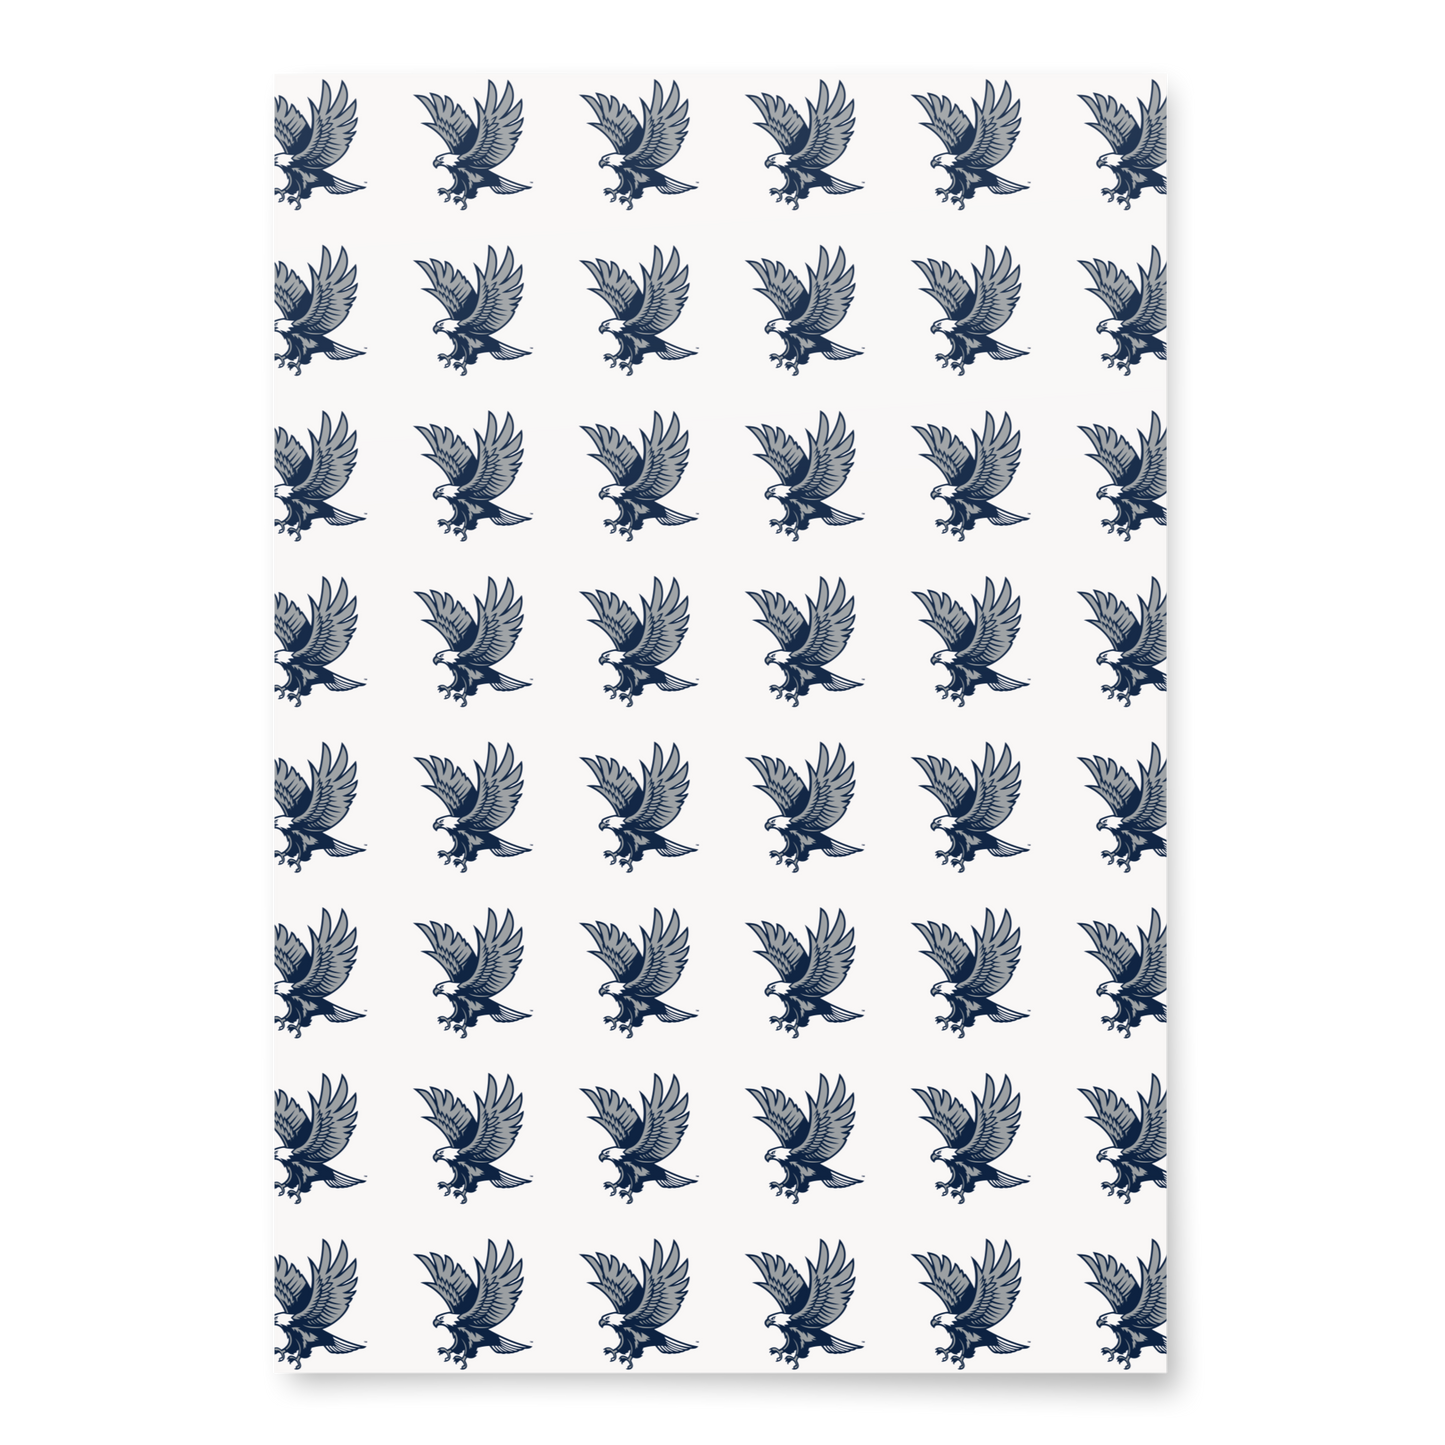 Three-Design Duchesne Eagles Wrapping Paper Sheets (3 Count)